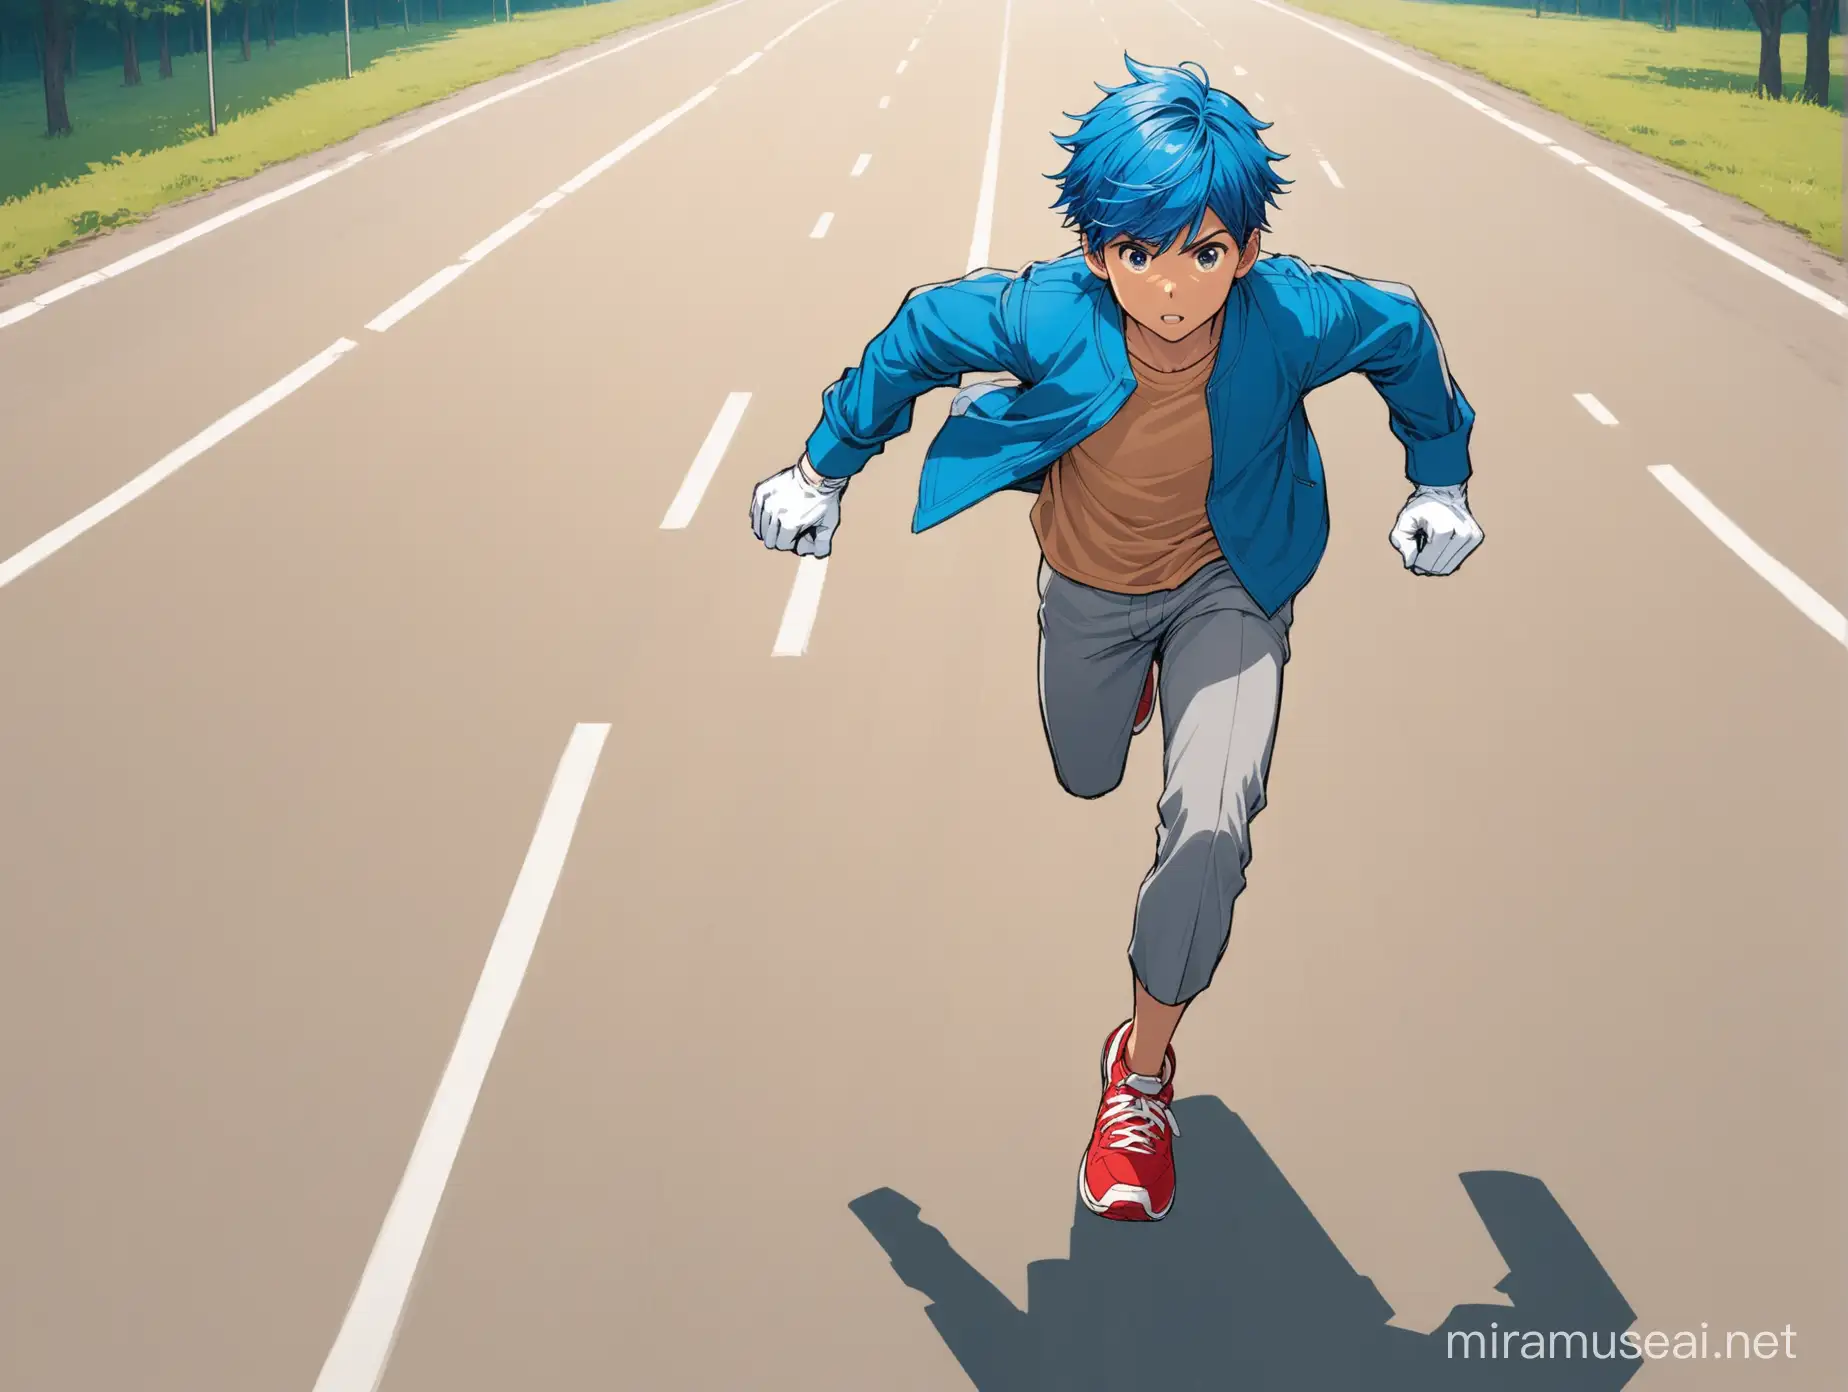 boy with blue fringe hair, blue jacket, tan shirt, white gloves, dark grey pants, red sneakers, running on a road